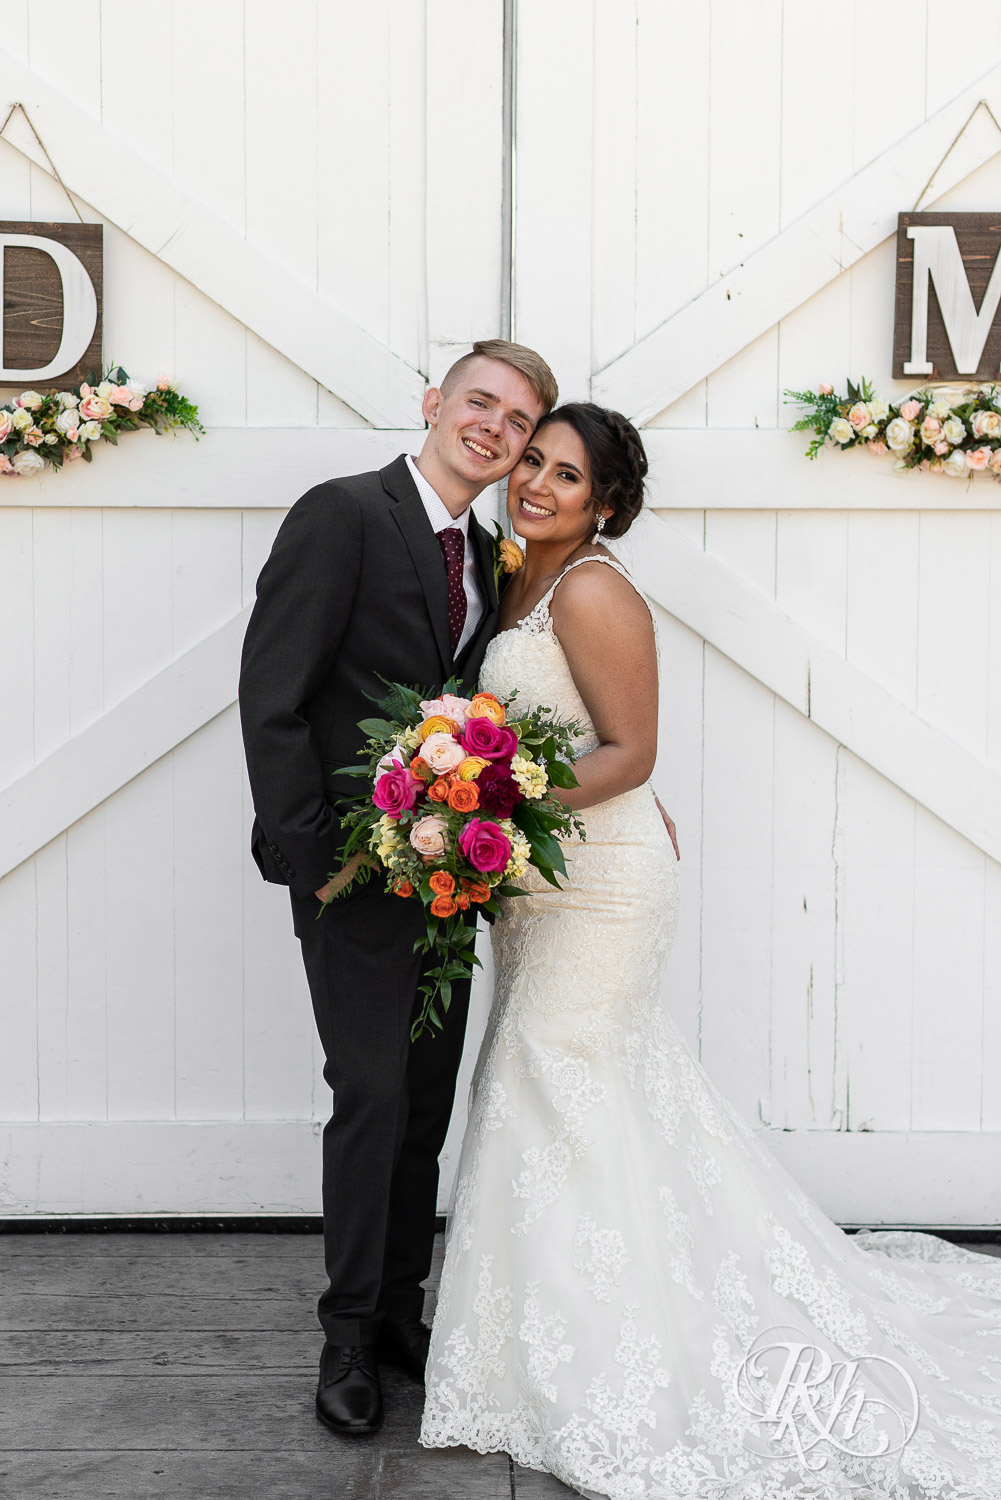 Bride and groom smiling in front of barn doors at wedding at Mayowood Stone Barn in Rochester, Minnesota.